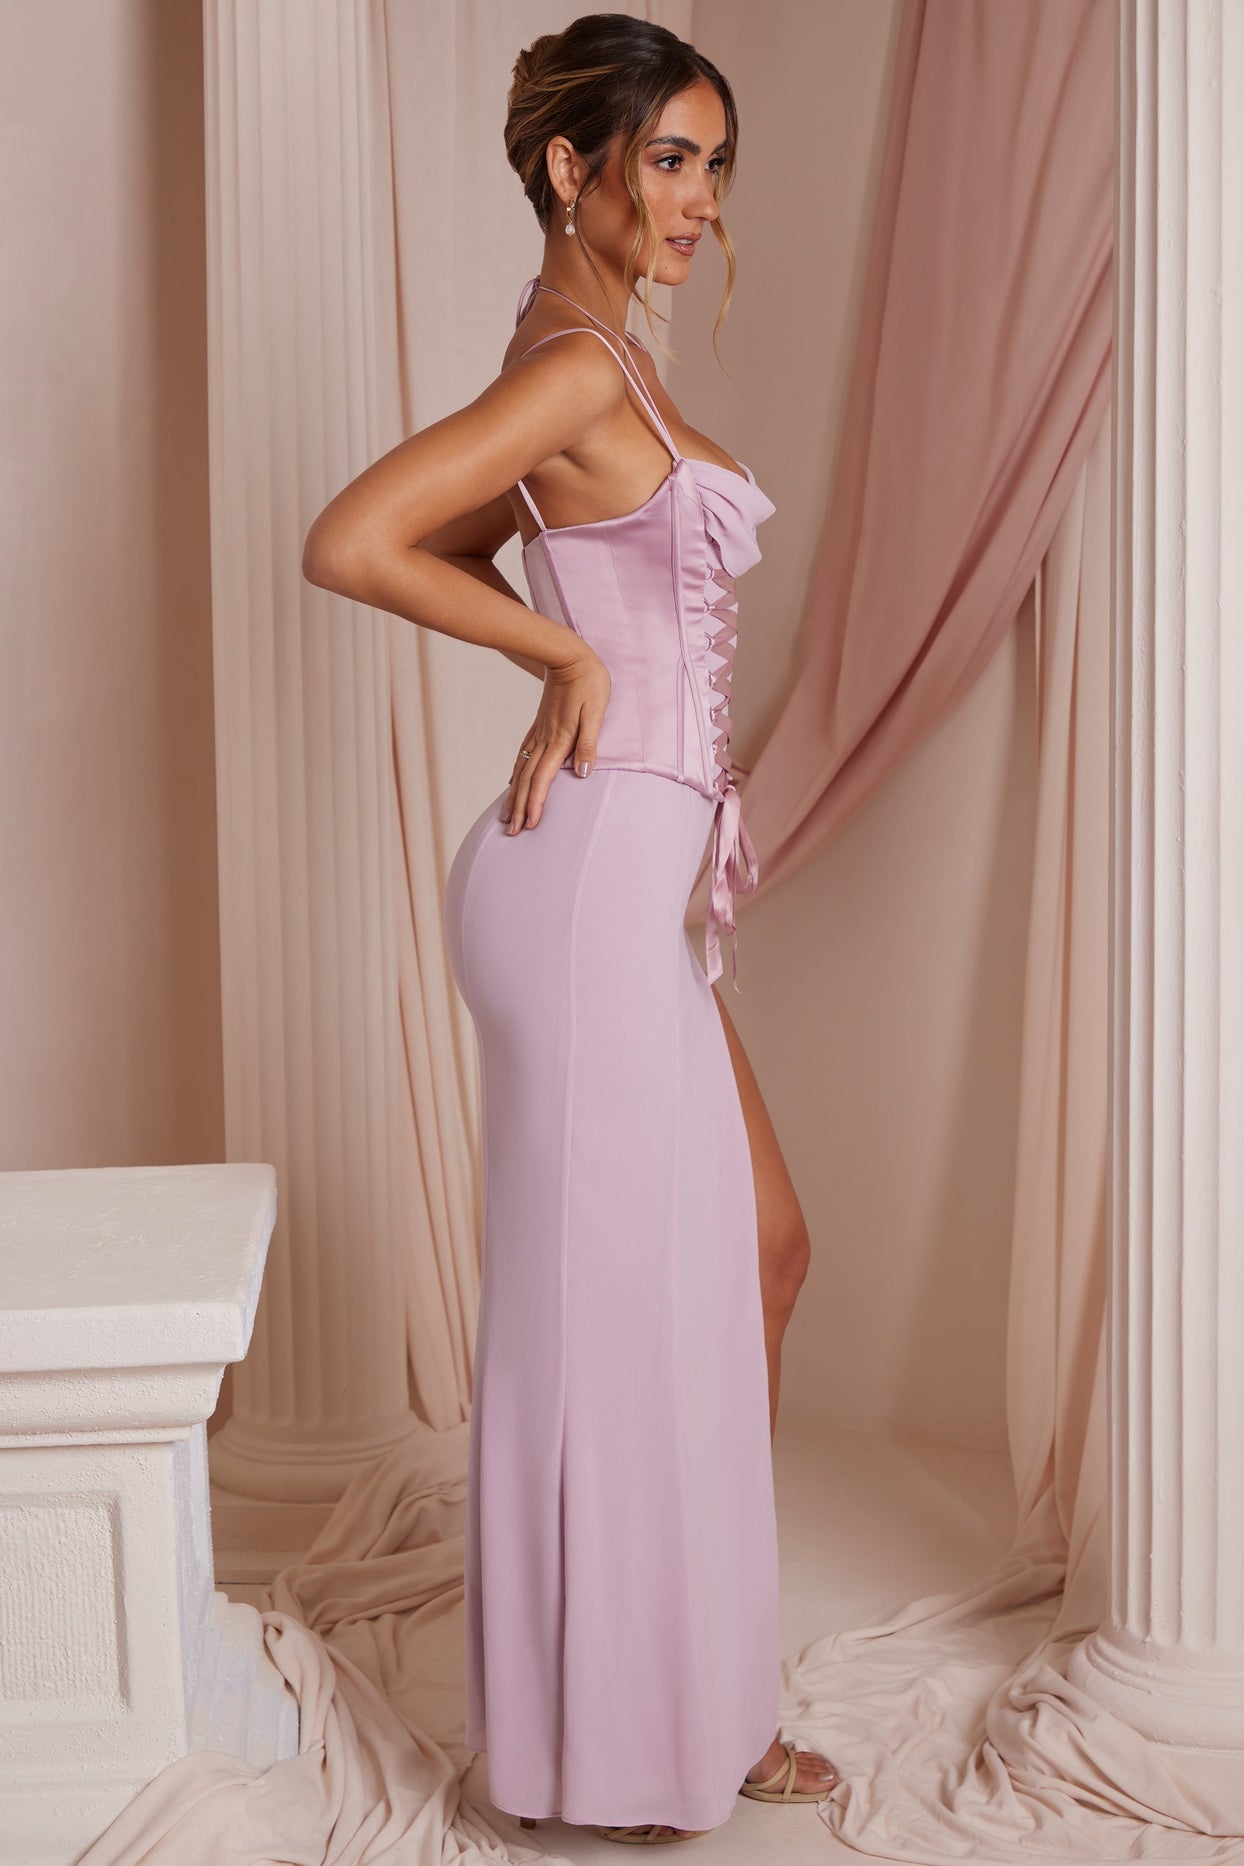 Lace Up Corset Maxi Dress in Dusty Pink